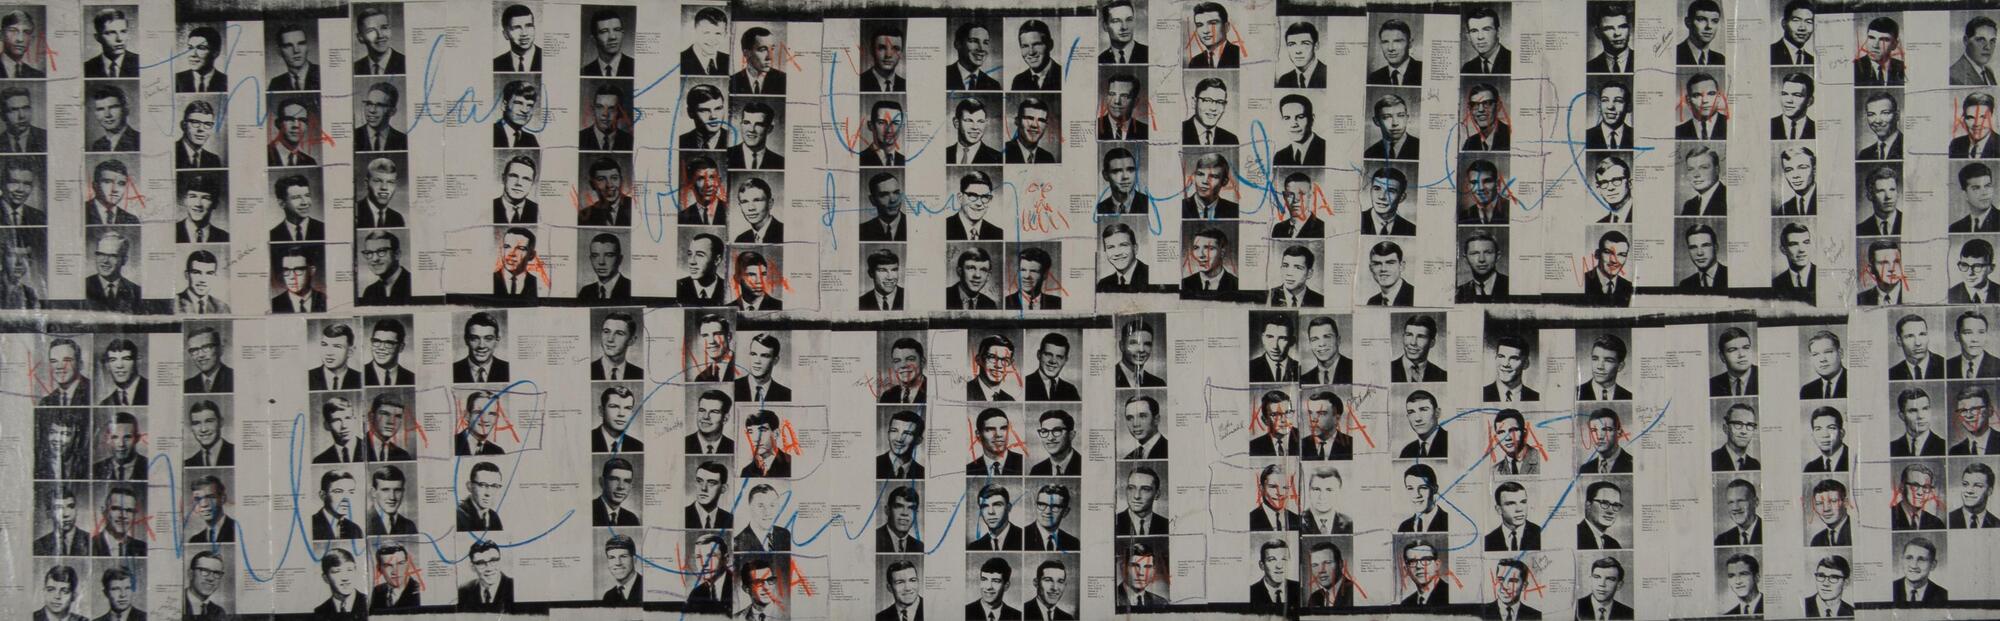 Copies of men&#39;s high school portraits from yearbook pages collaged onto board. There are words written across in red, blue, orange and purple crayon &quot;The Class of 65....&quot;